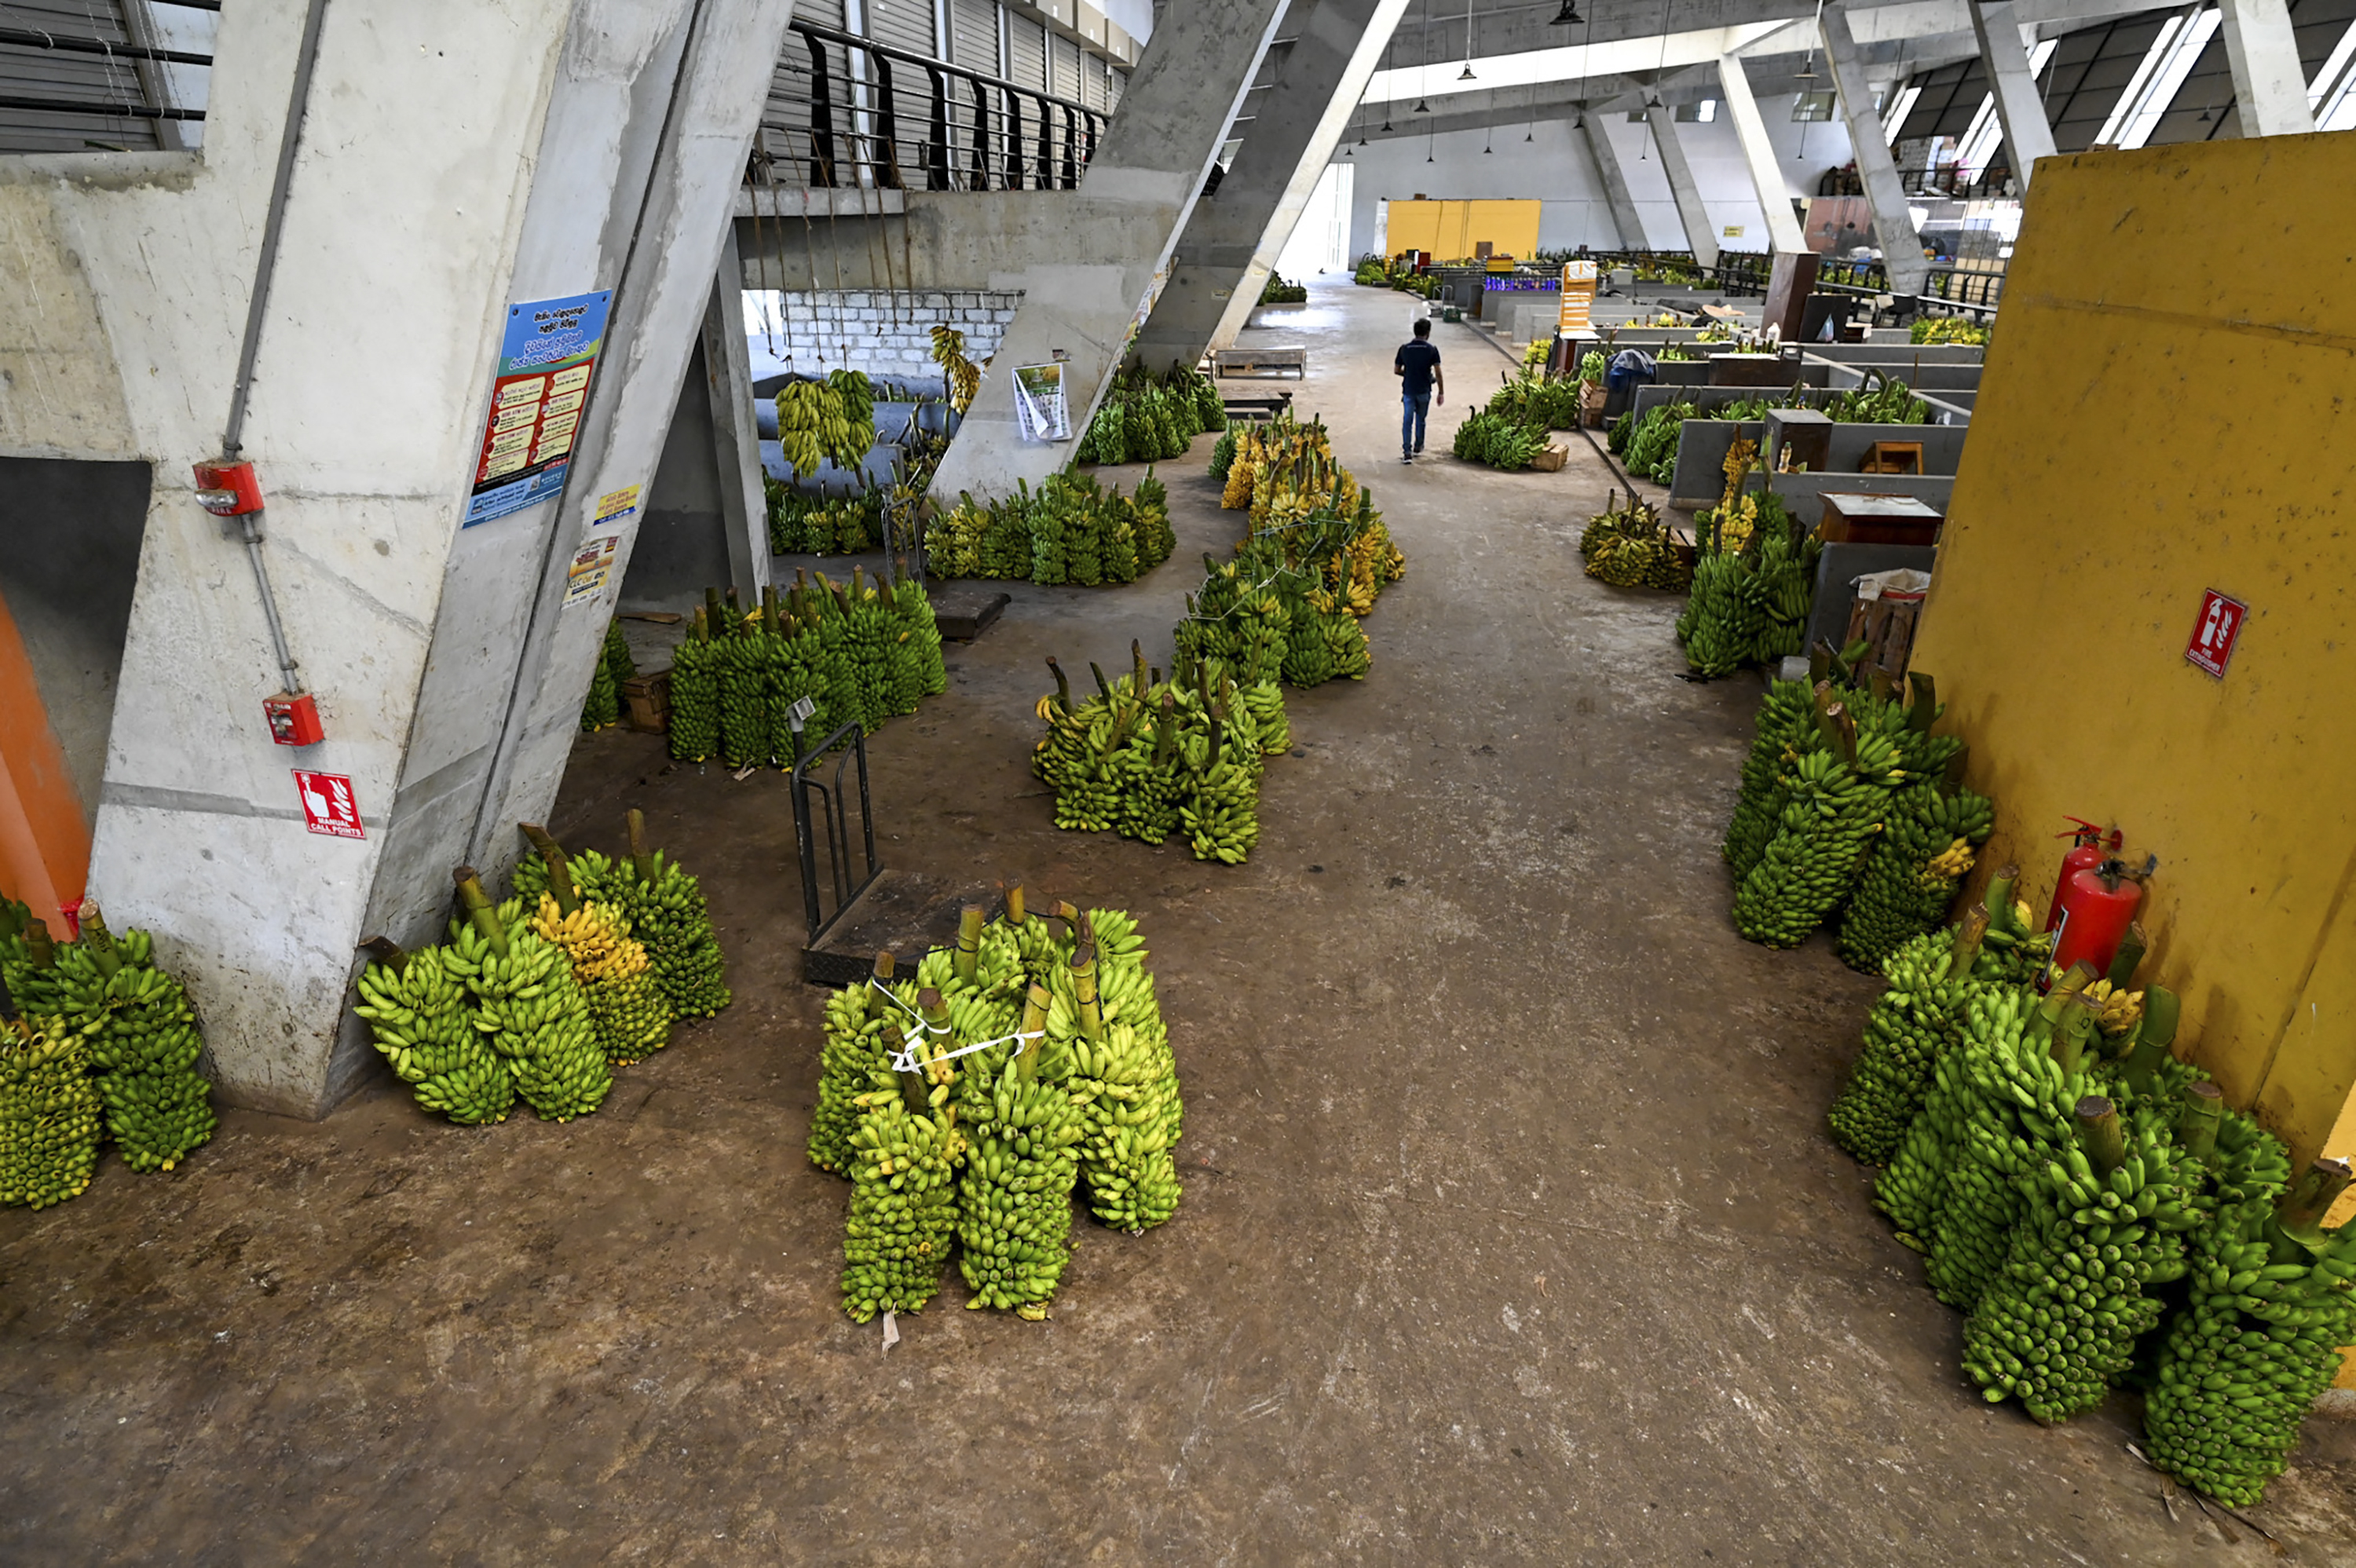 Stalks of bananas are seen at the deserted Manin market